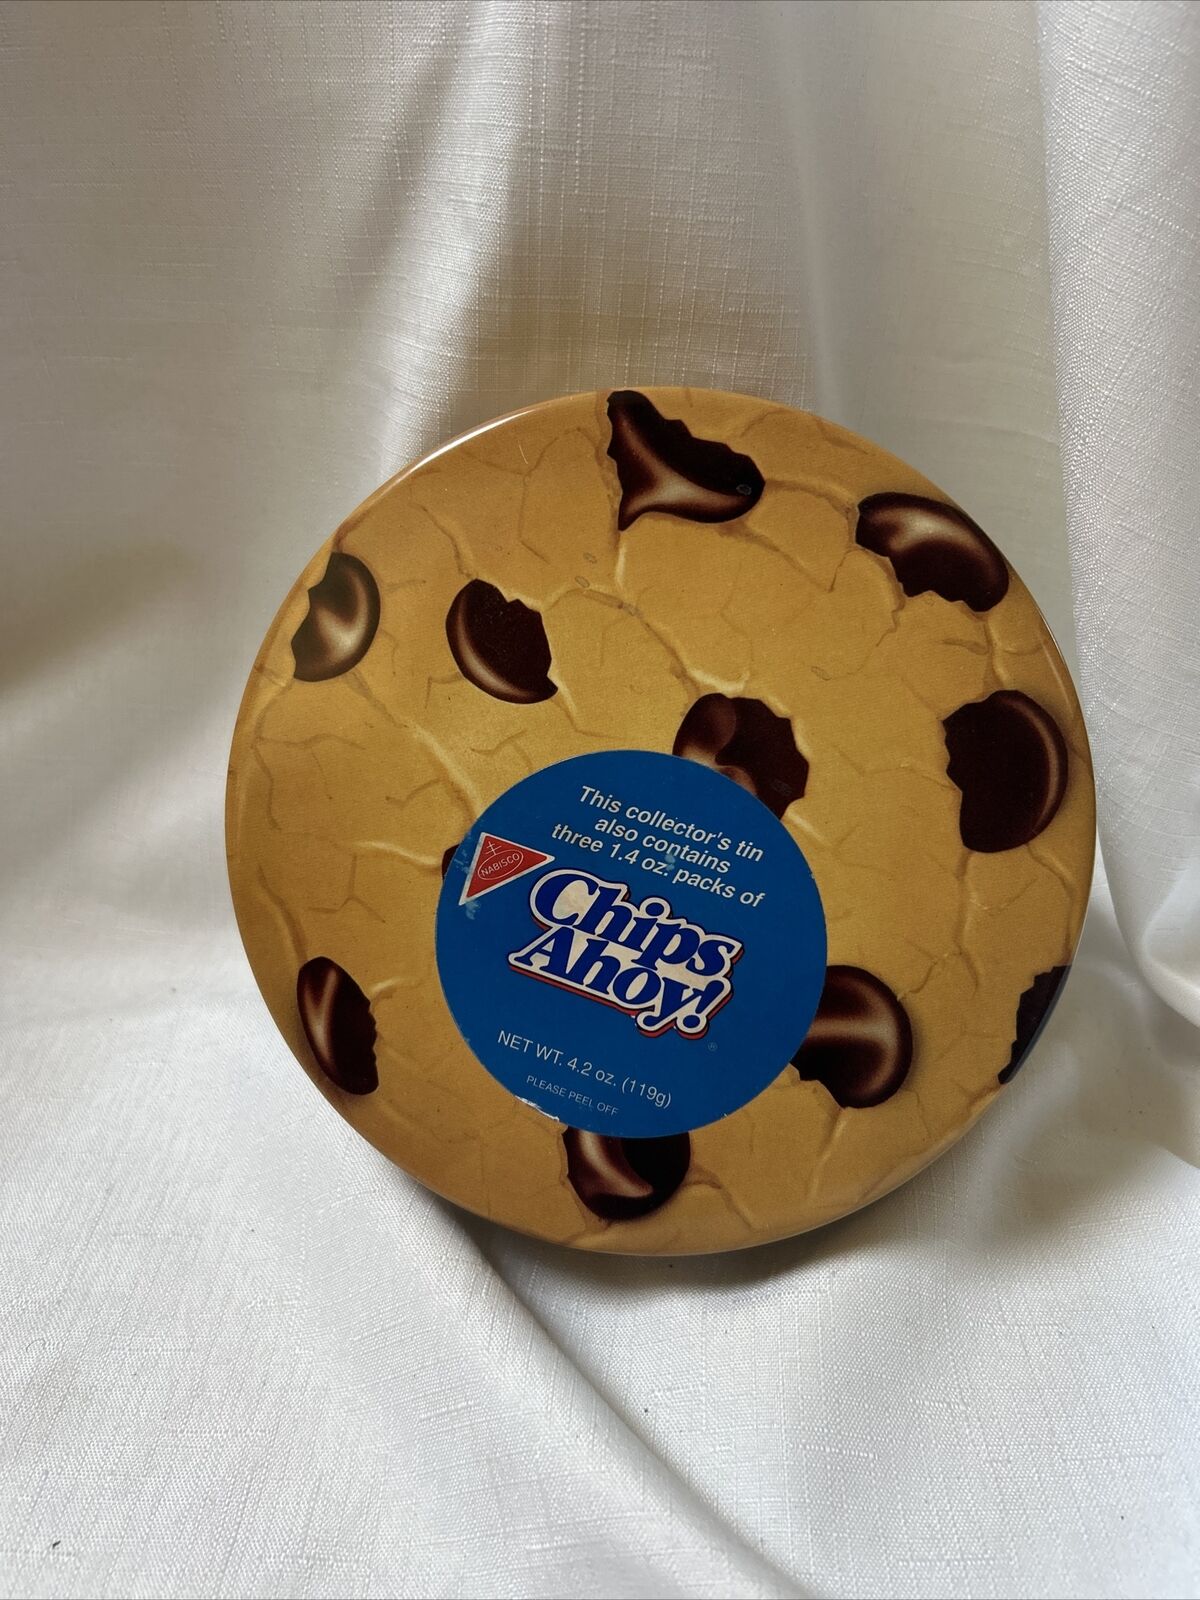 Nabisco Chips Ahoy Tin Container 95’ Limited Edition